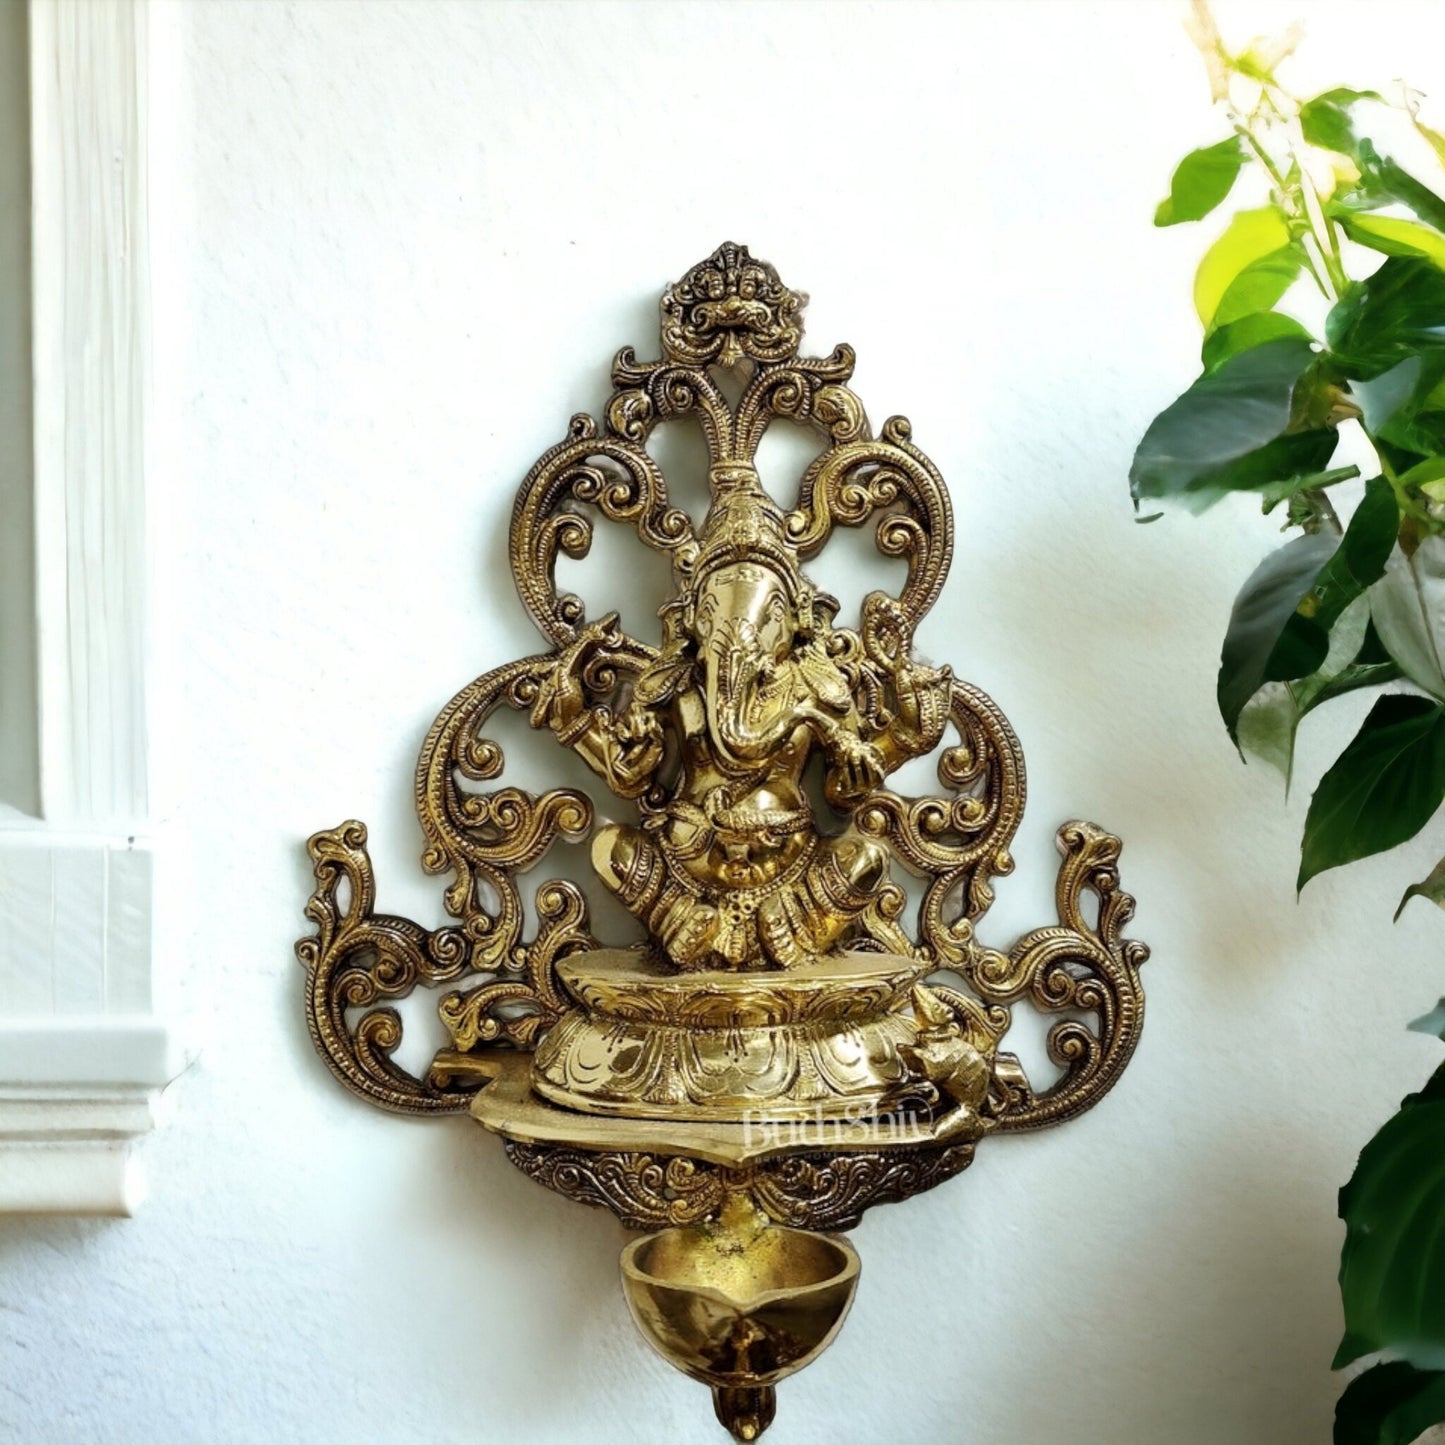 Handcrafted Lord Ganesha Wall Hanging Statue with Floral Design Frame | Diya Included - Budhshiv.com